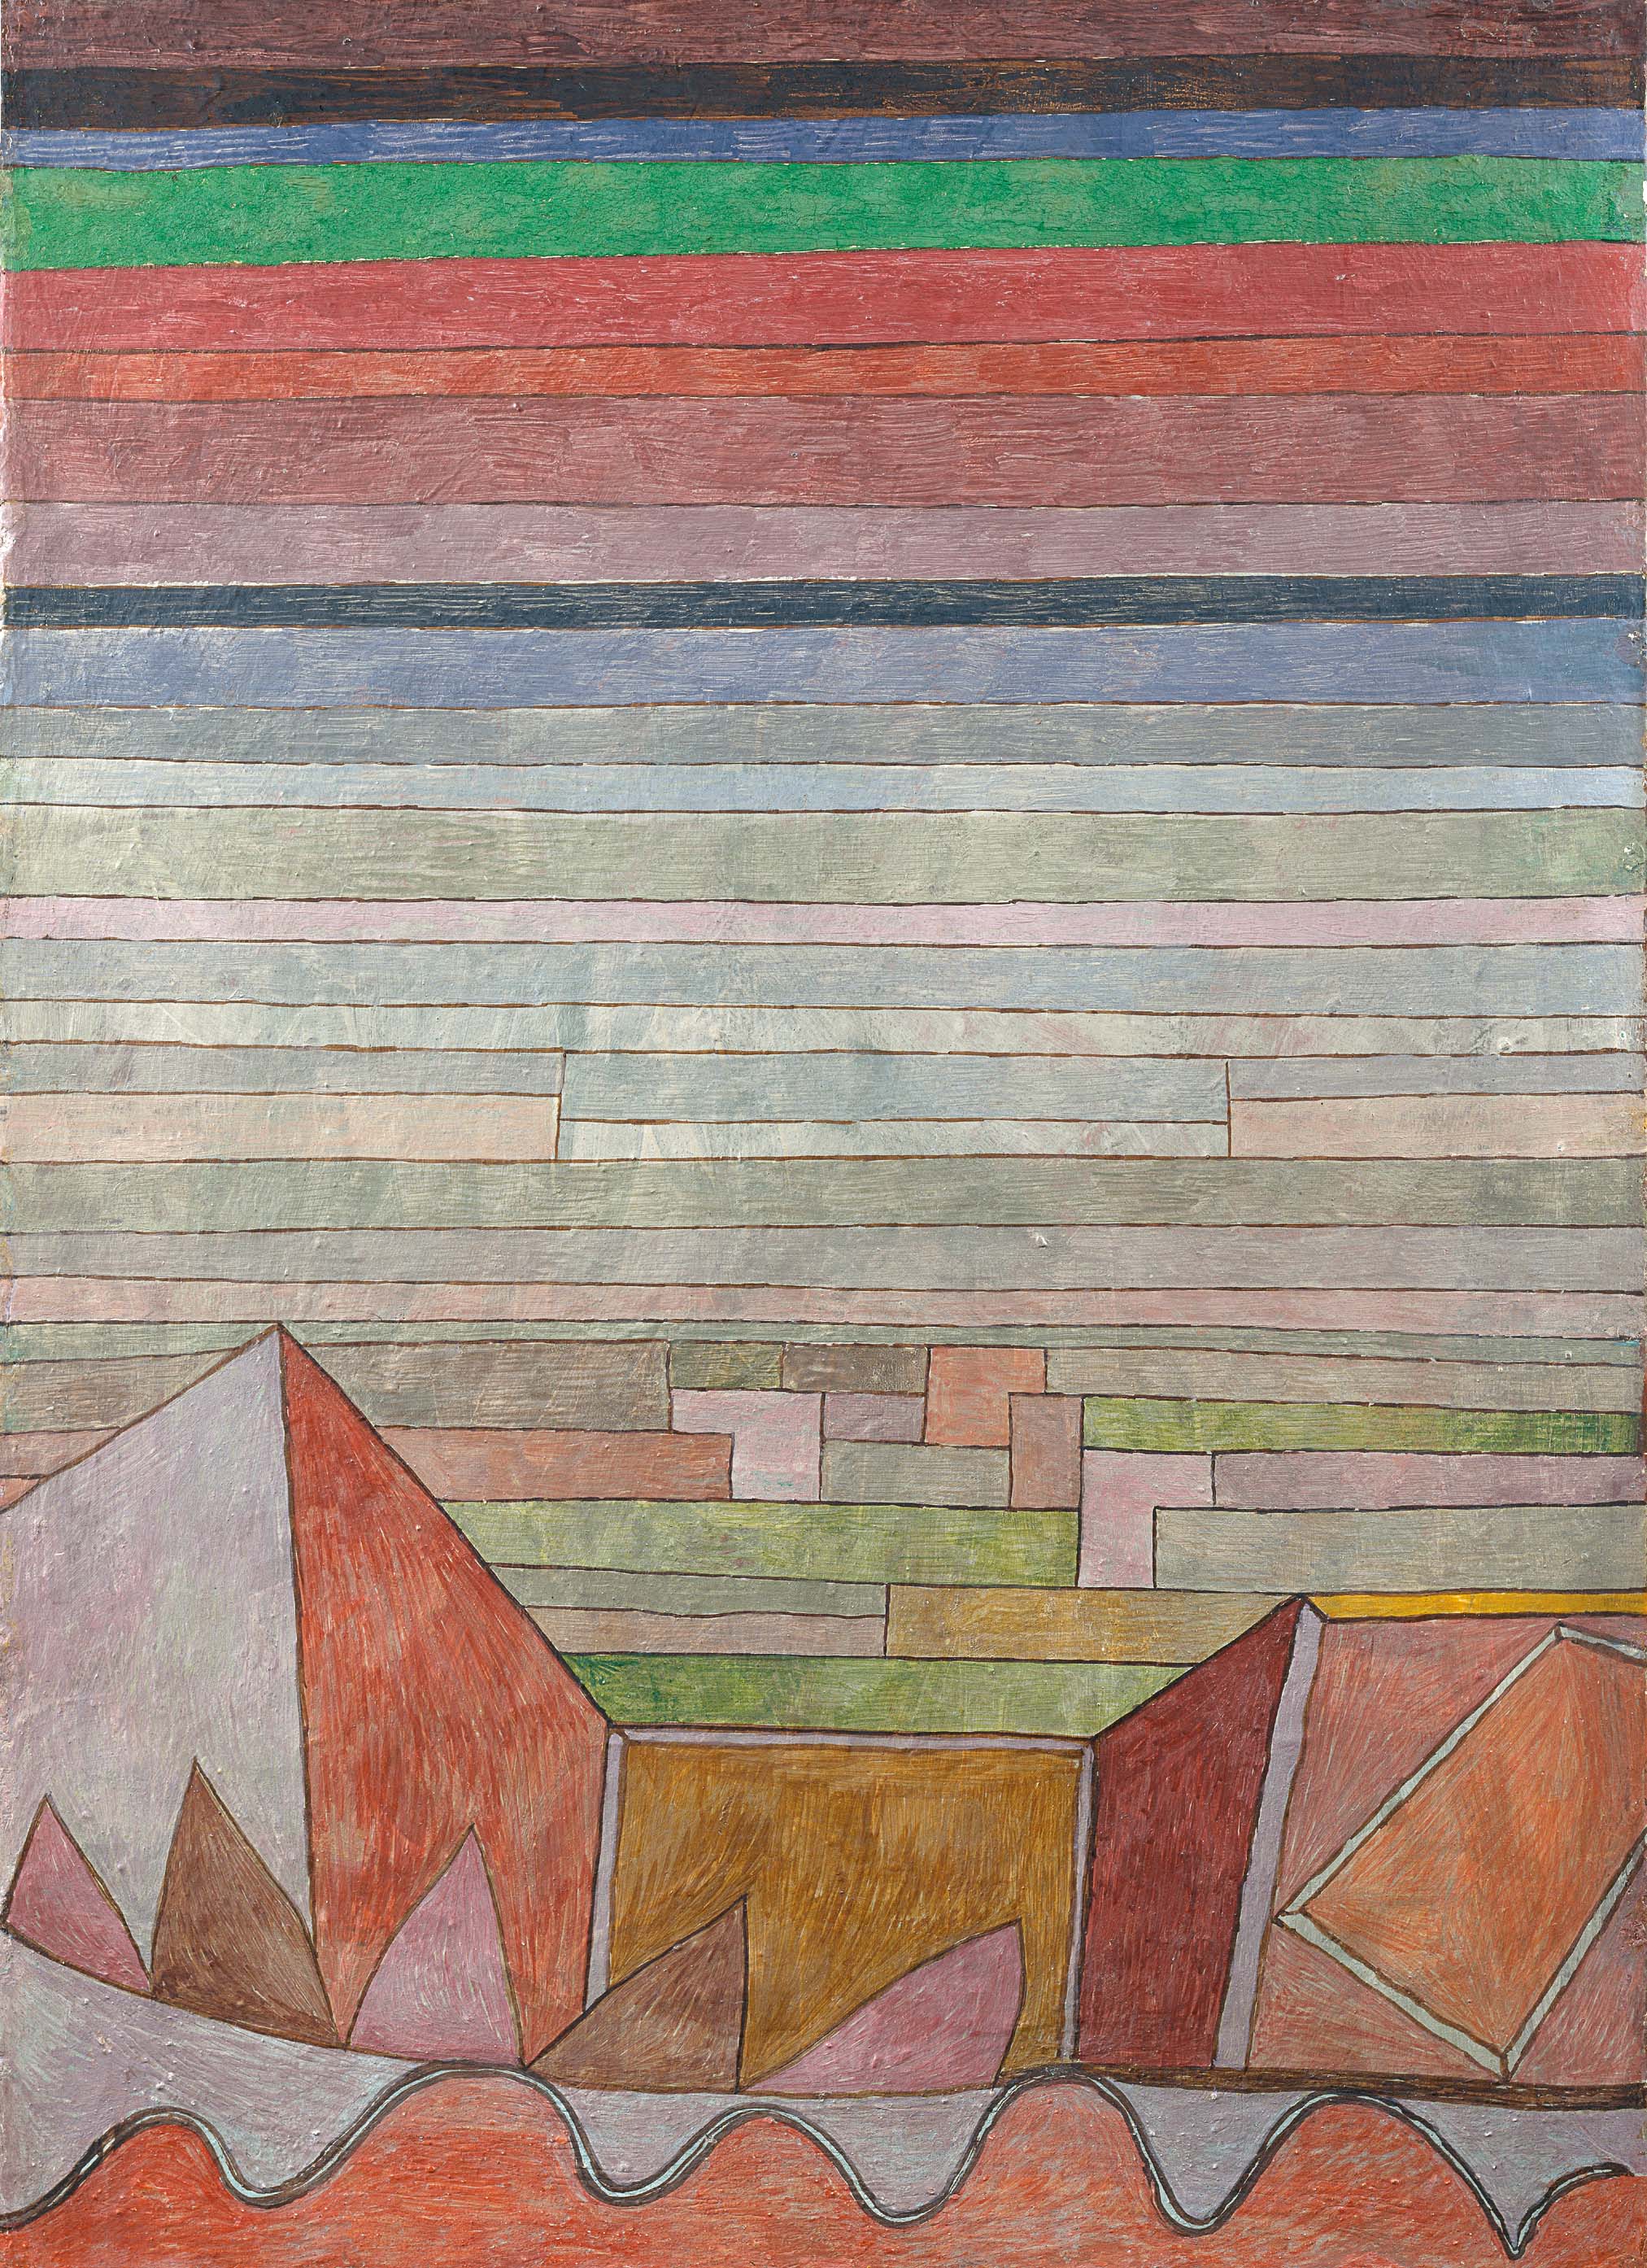 View into the Fertile Country by Paul Klee - 1932 - 48.5 x 34.5 cm Städel Museum